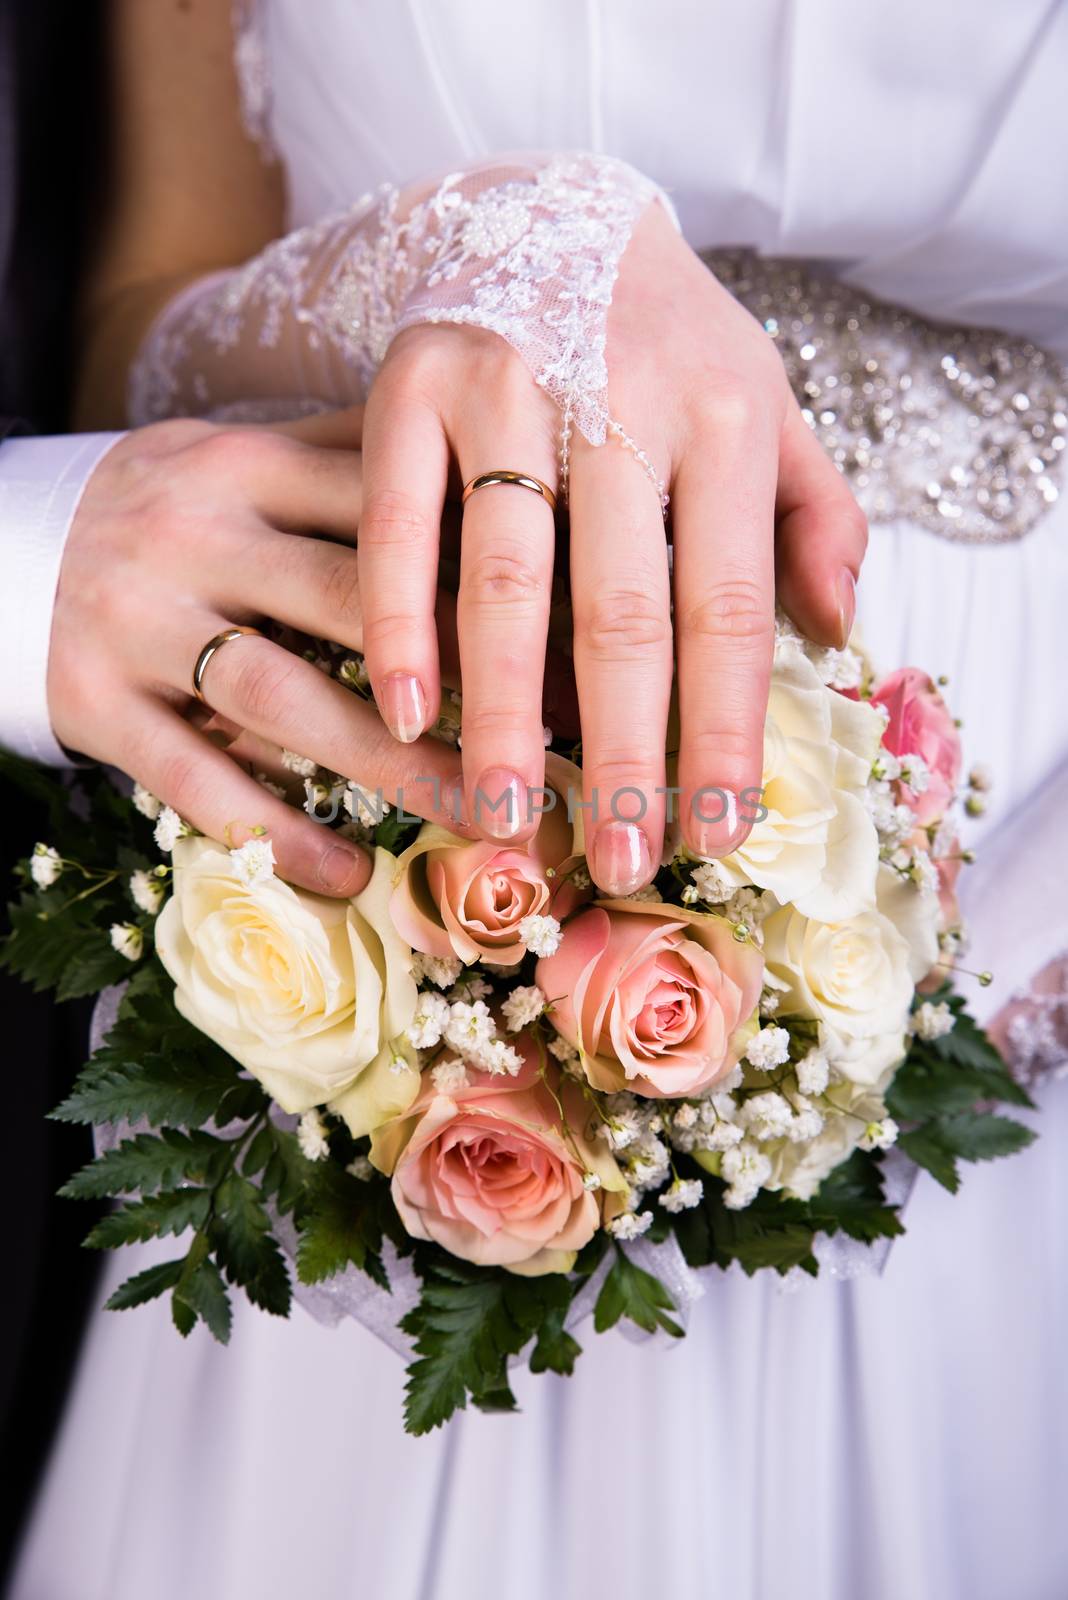 Hands of the newlyweds with wedding bouquet. vertical shot